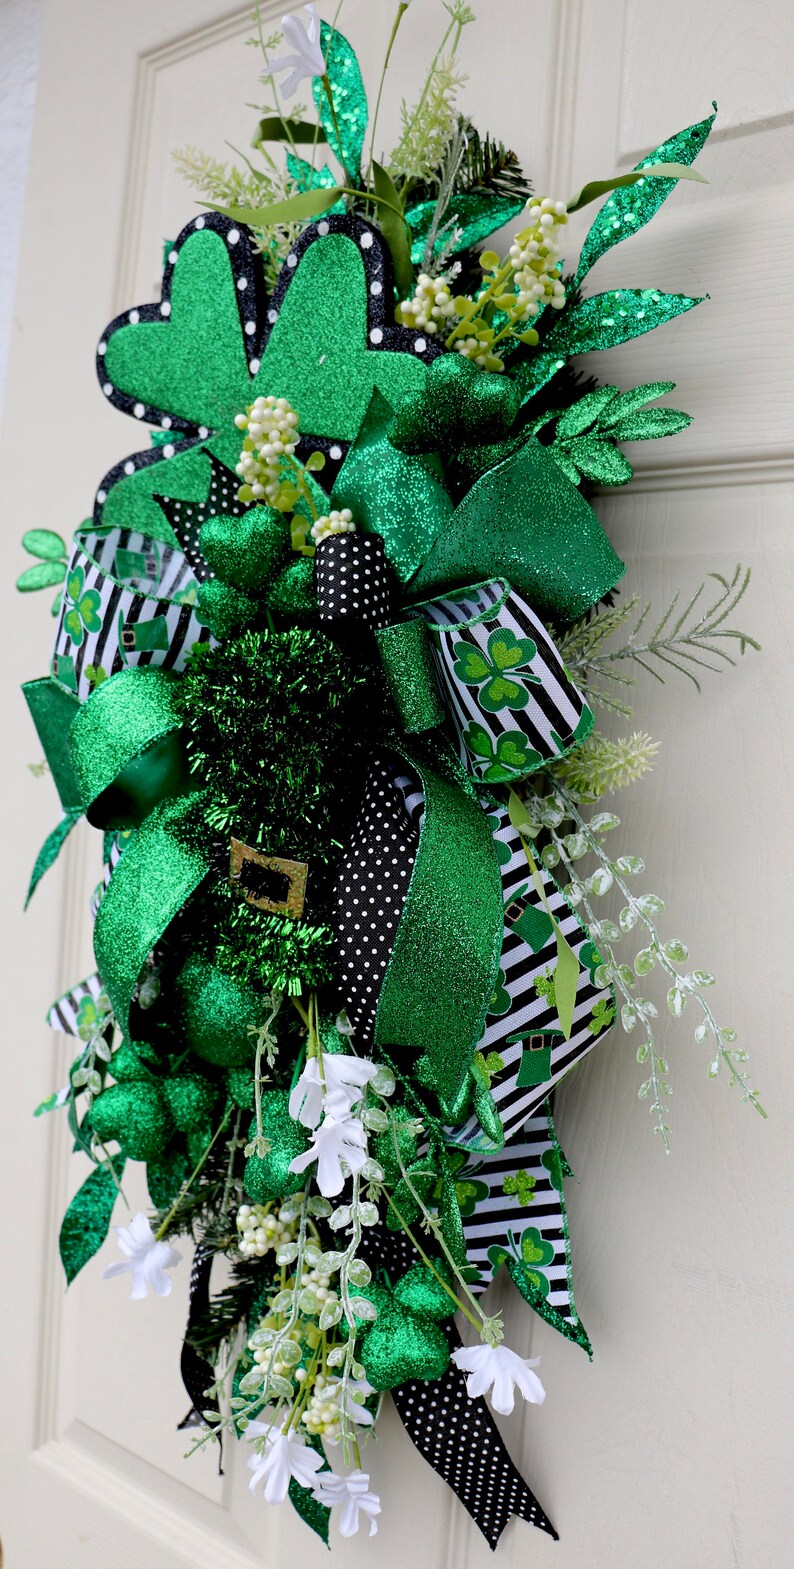 St. Patrick's Day Wreath, St. Patty's Day Swag, St. Patrick's Day Decor, Shamrock Wreath, Spring Wreath, Front Door teardrop swag, green image 8